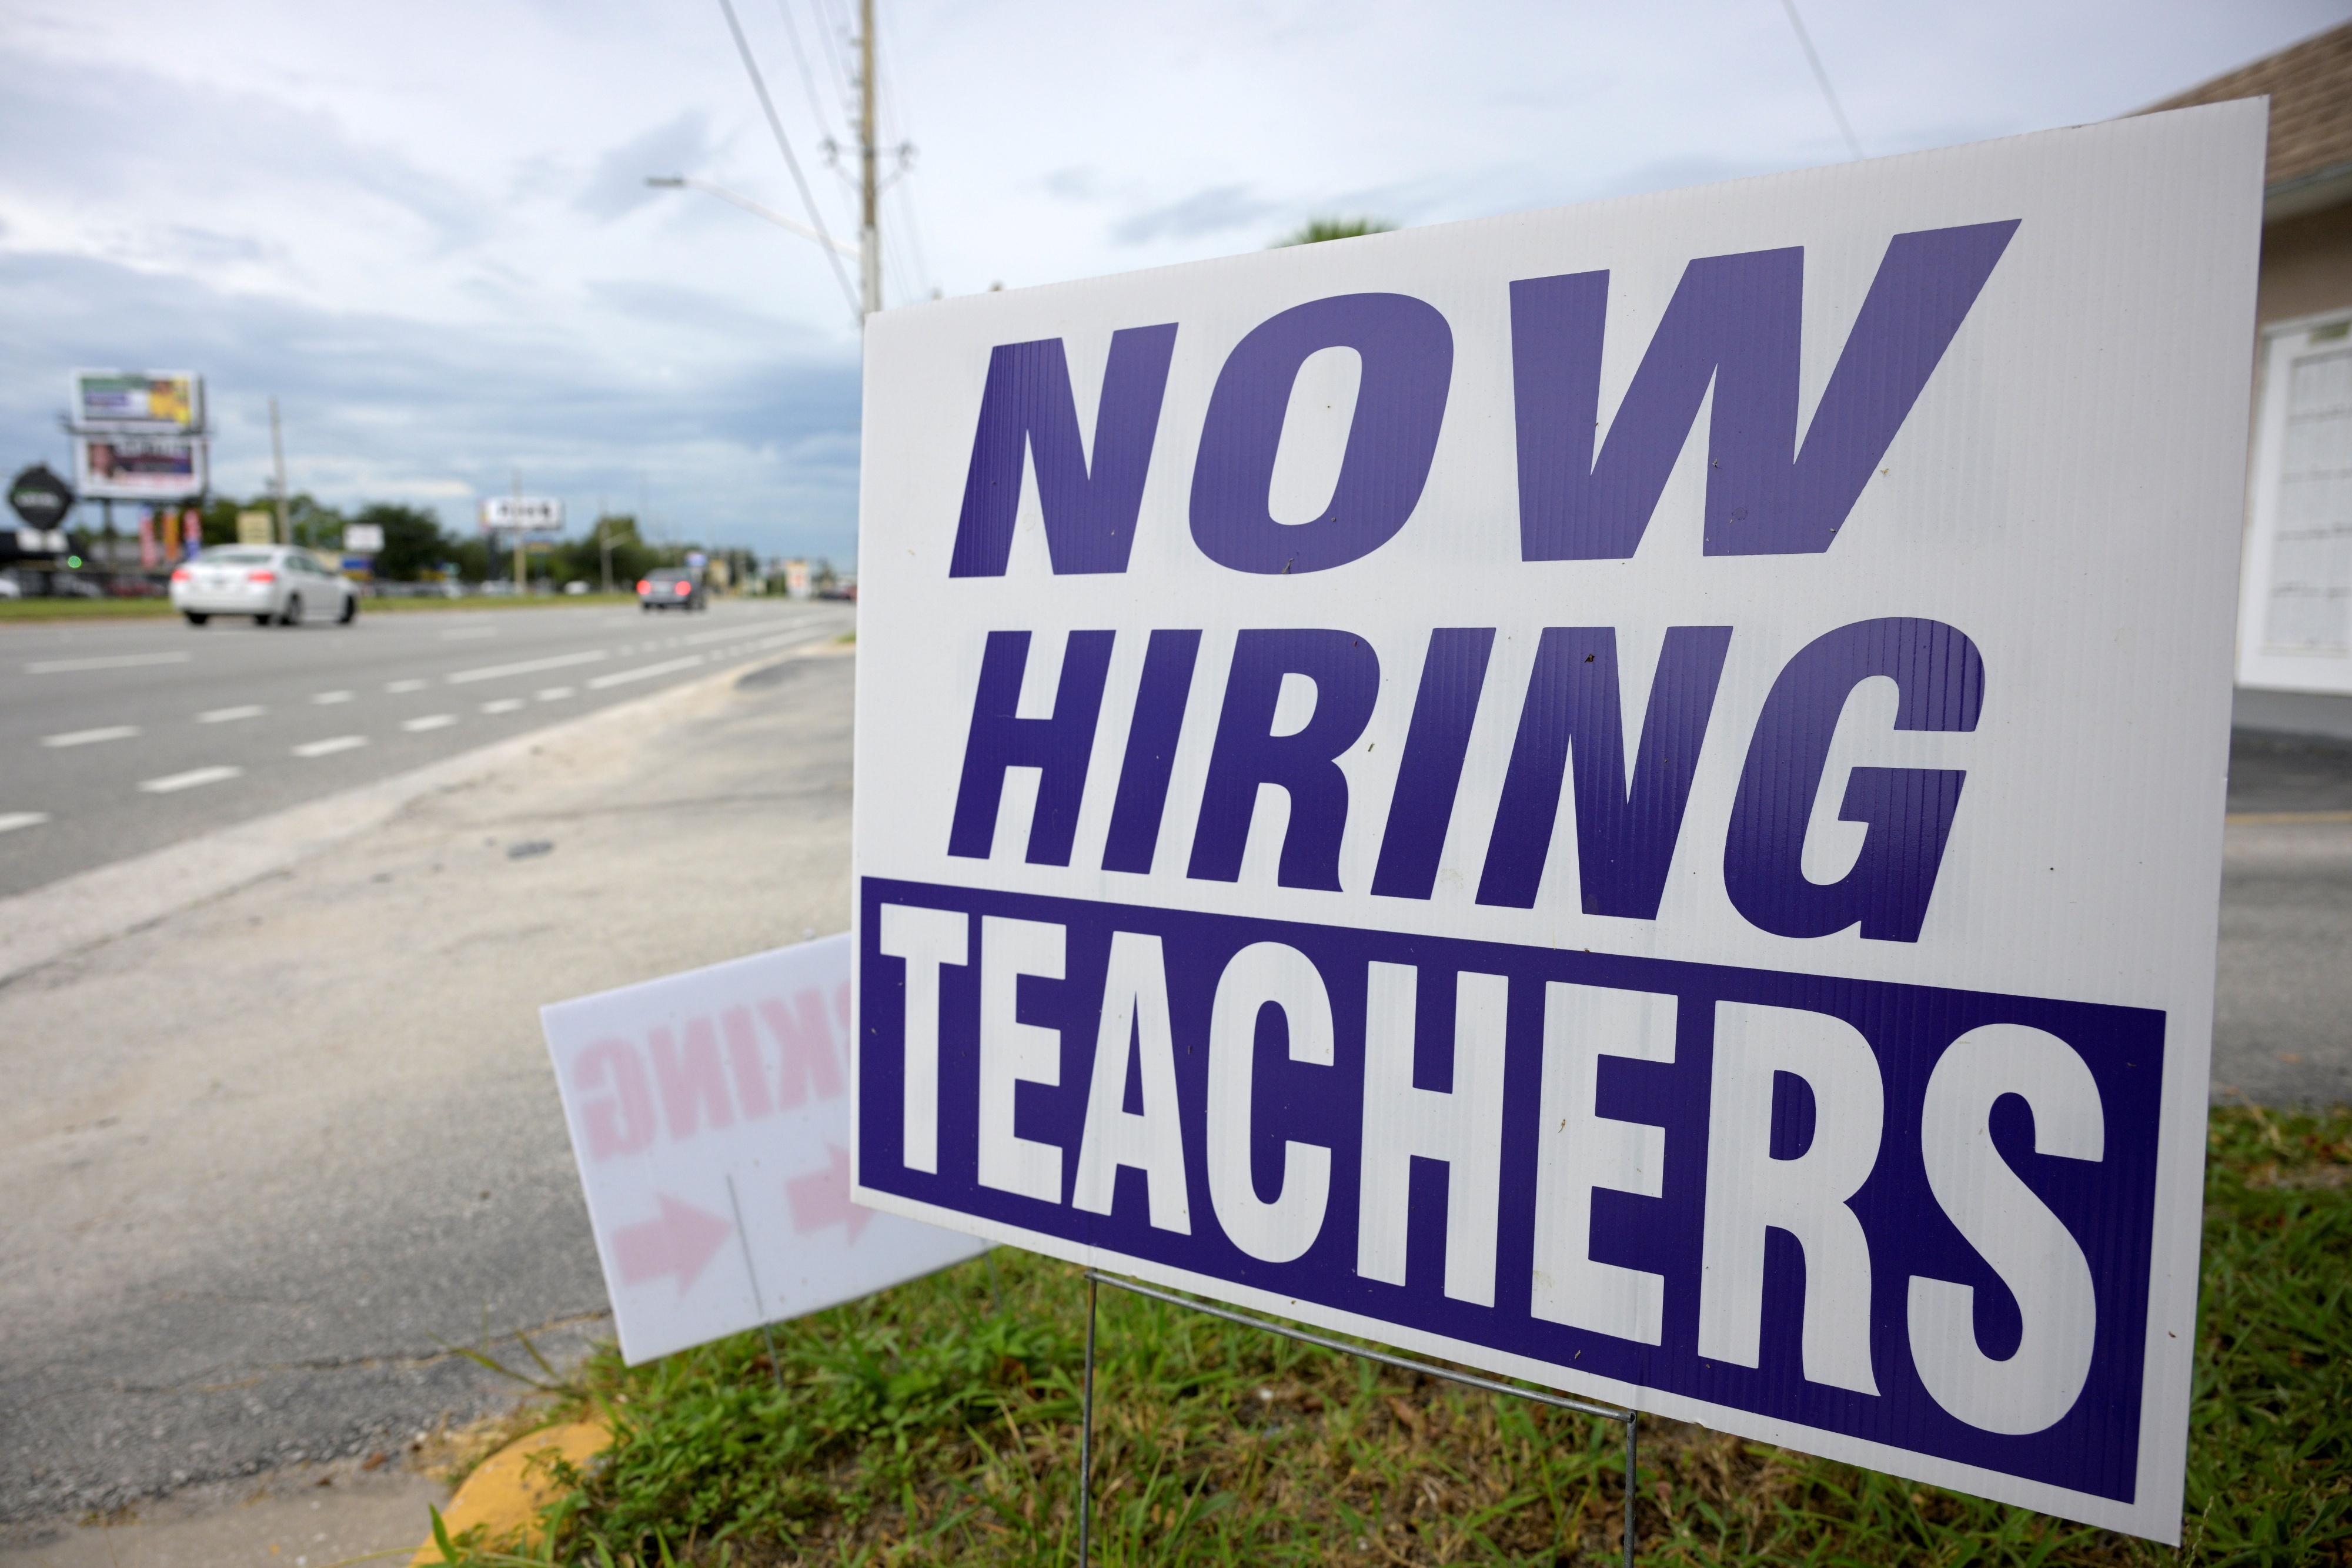 A sign by a roadside which reads "Now Hiring Teachers"